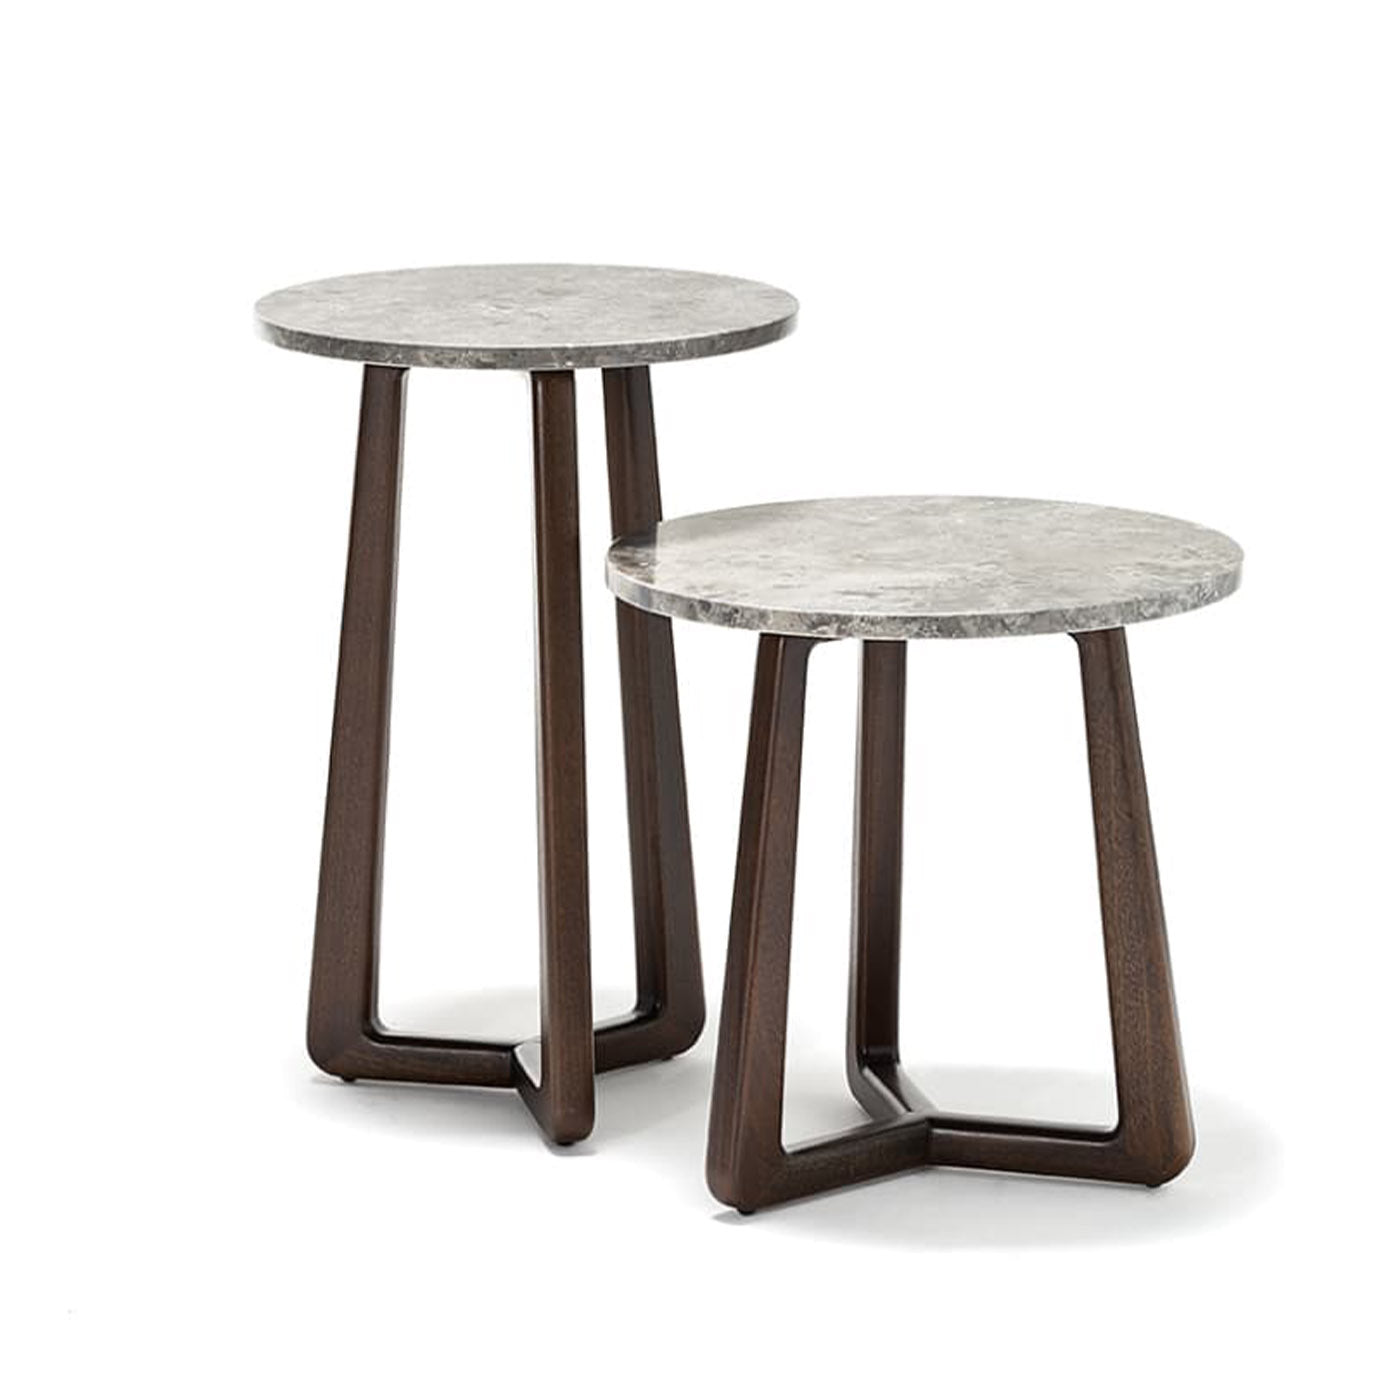 Sunset Tall Sahara Grey Side Table by Paola Navone - Alternative view 3